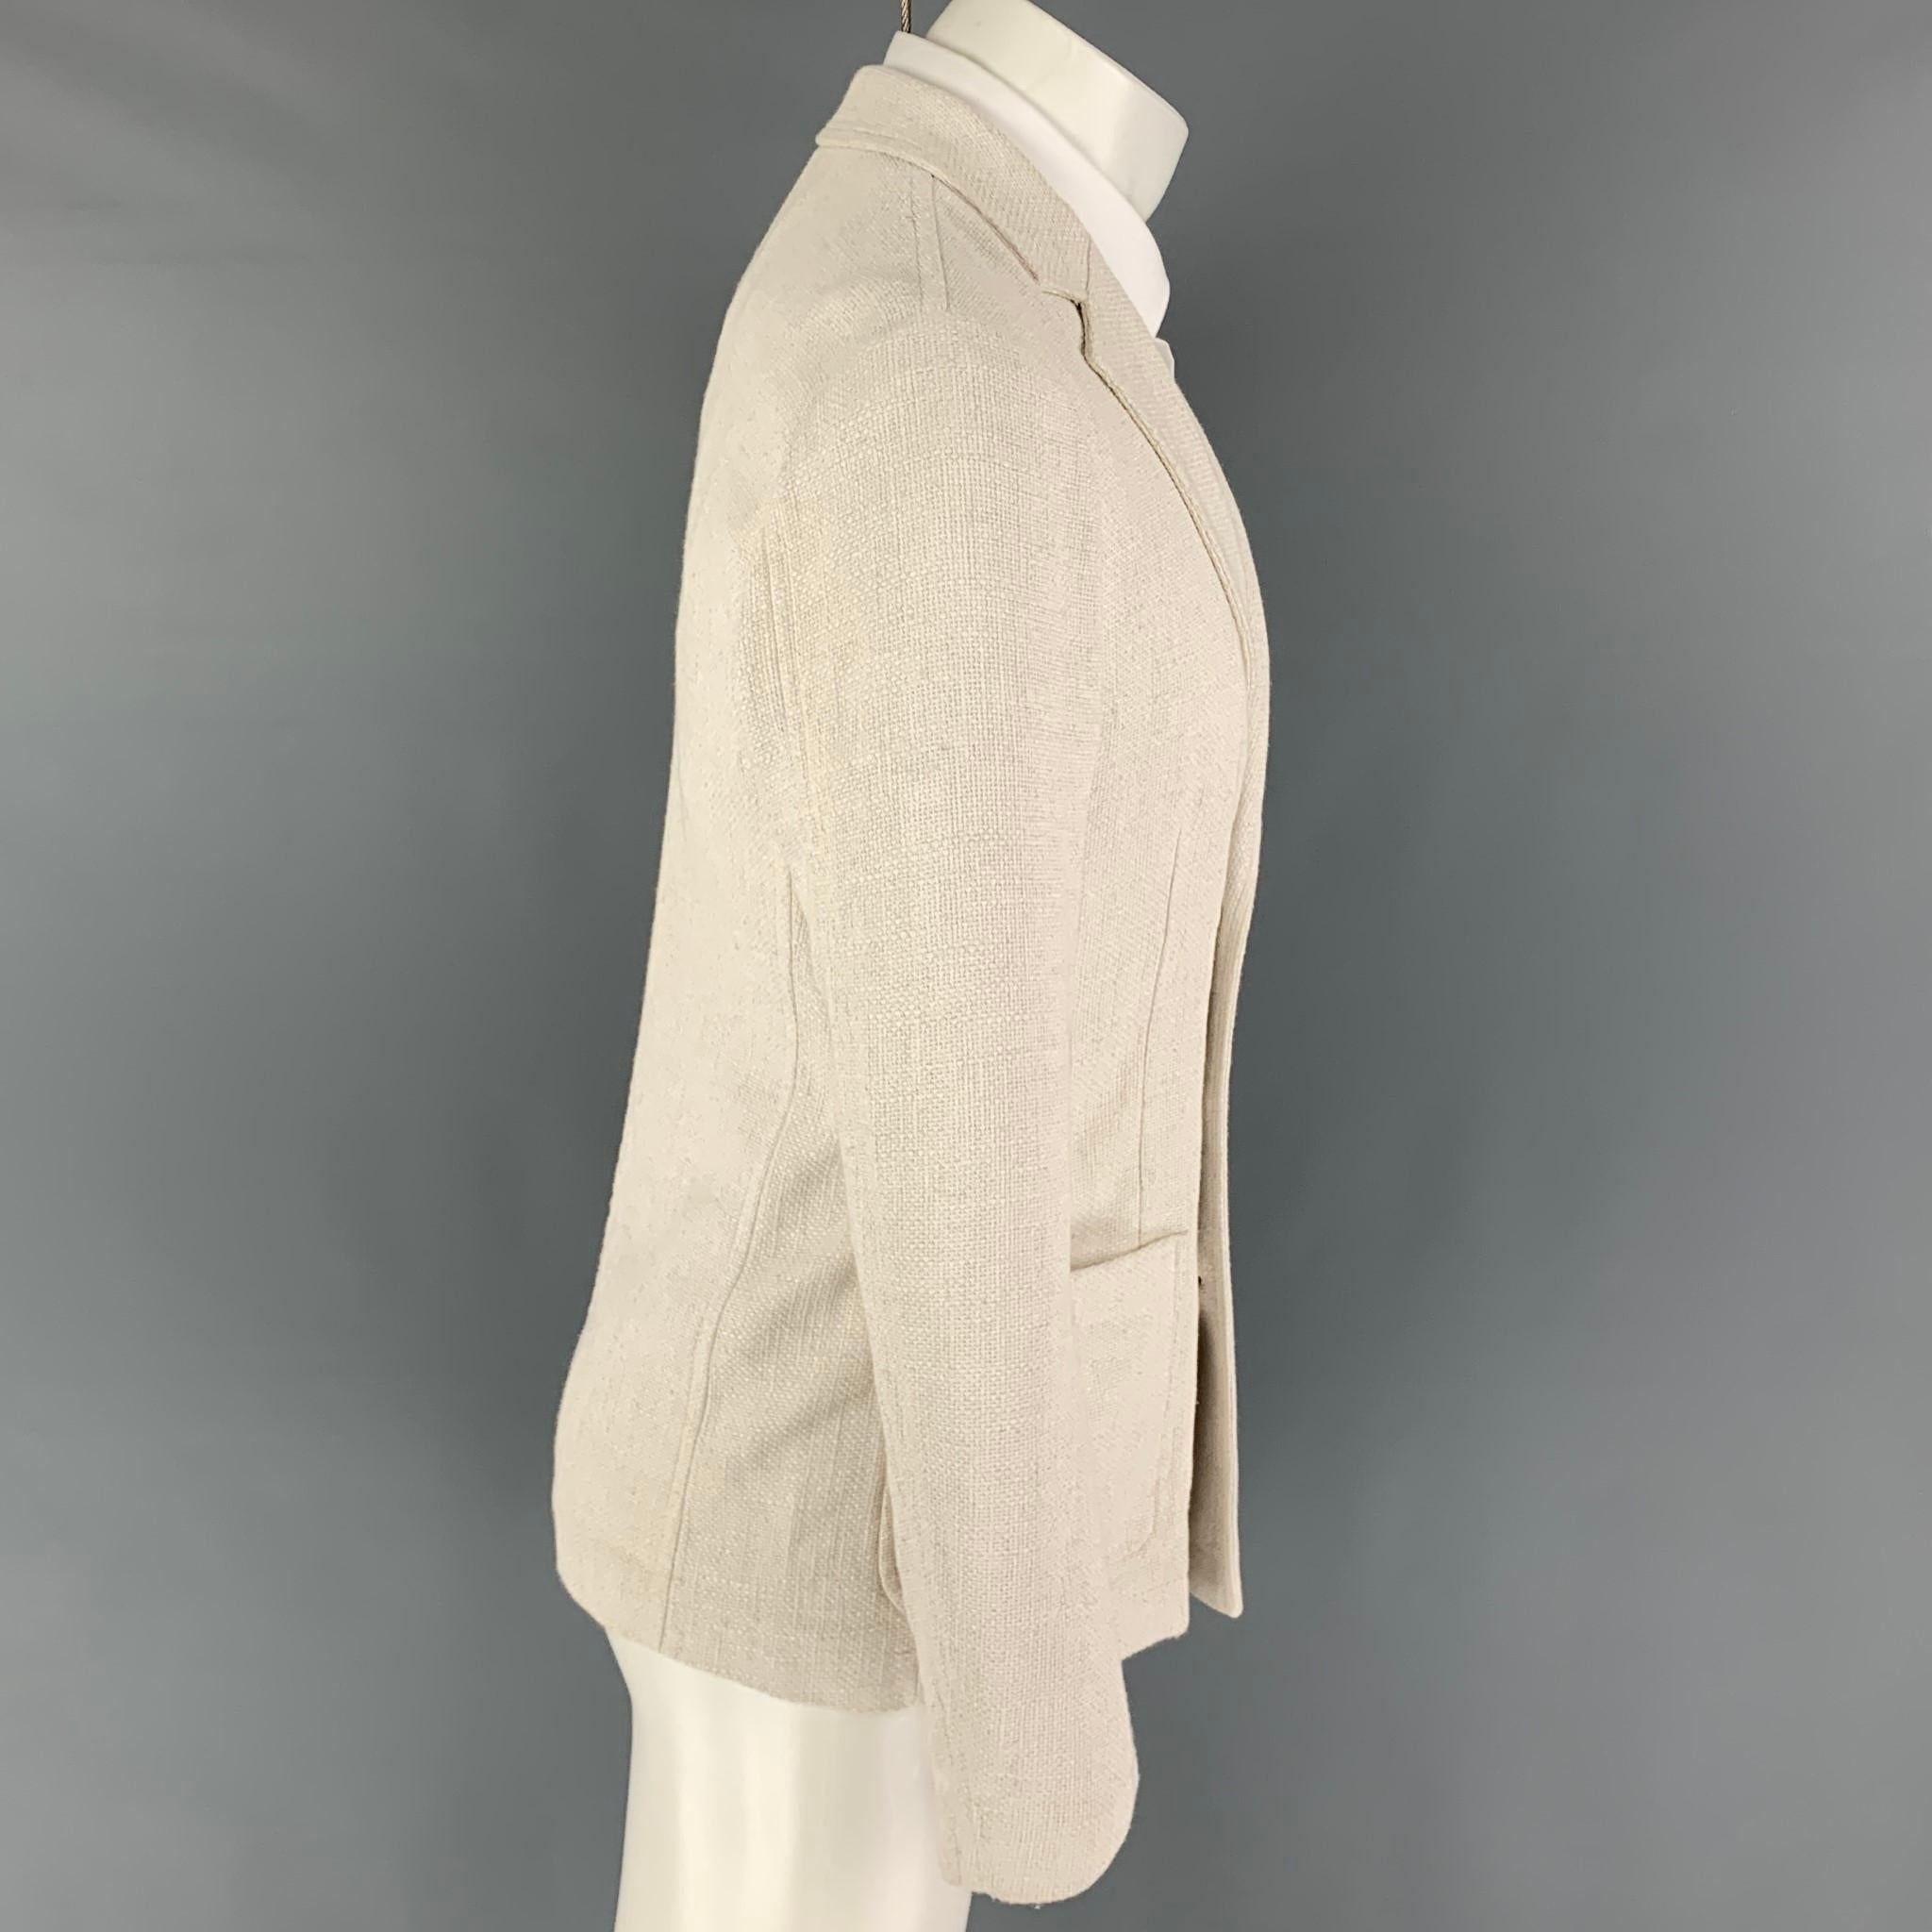 GIORGIO ARMANI sport coat comes in a off white woven viscose blend featuring a notch lapel, patch pockets, and a double breasted closure. Made in Italy. 

Excellent Pre-Owned Condition.
Marked: 46

Measurements:

Shoulder: 17 in.
Chest: 36